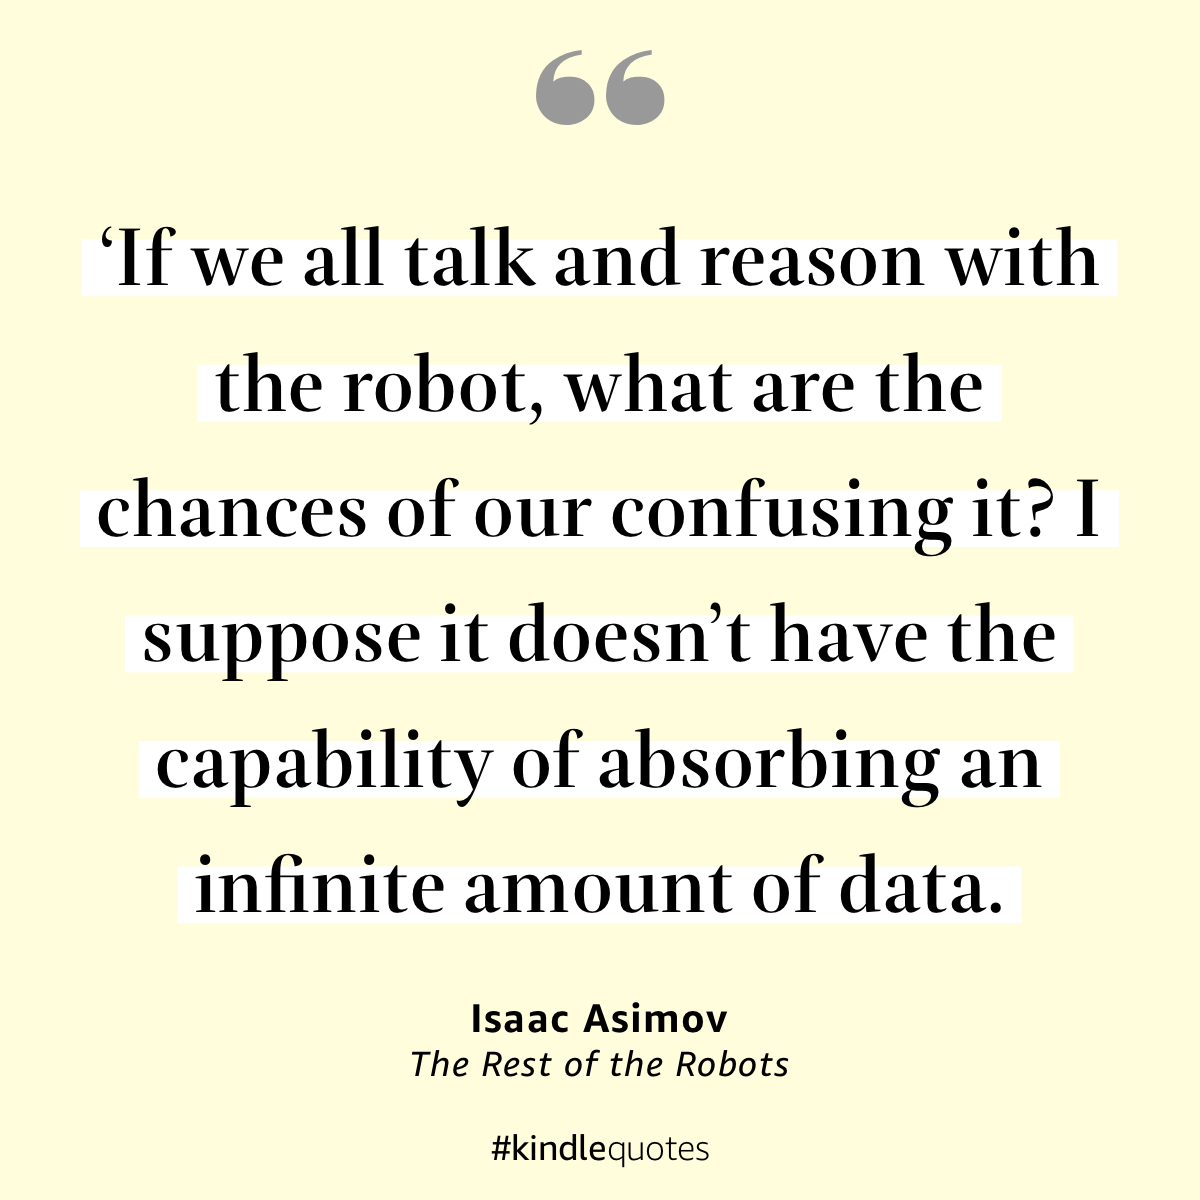 Compute might also not be a problem. Asimov envisioned robots with flawless memory. Today's AI aspires to this level of precision. What are your thoughts on the balance between AI reliability and human oversight? #DataIntegrity #MachineLearning #Asimov